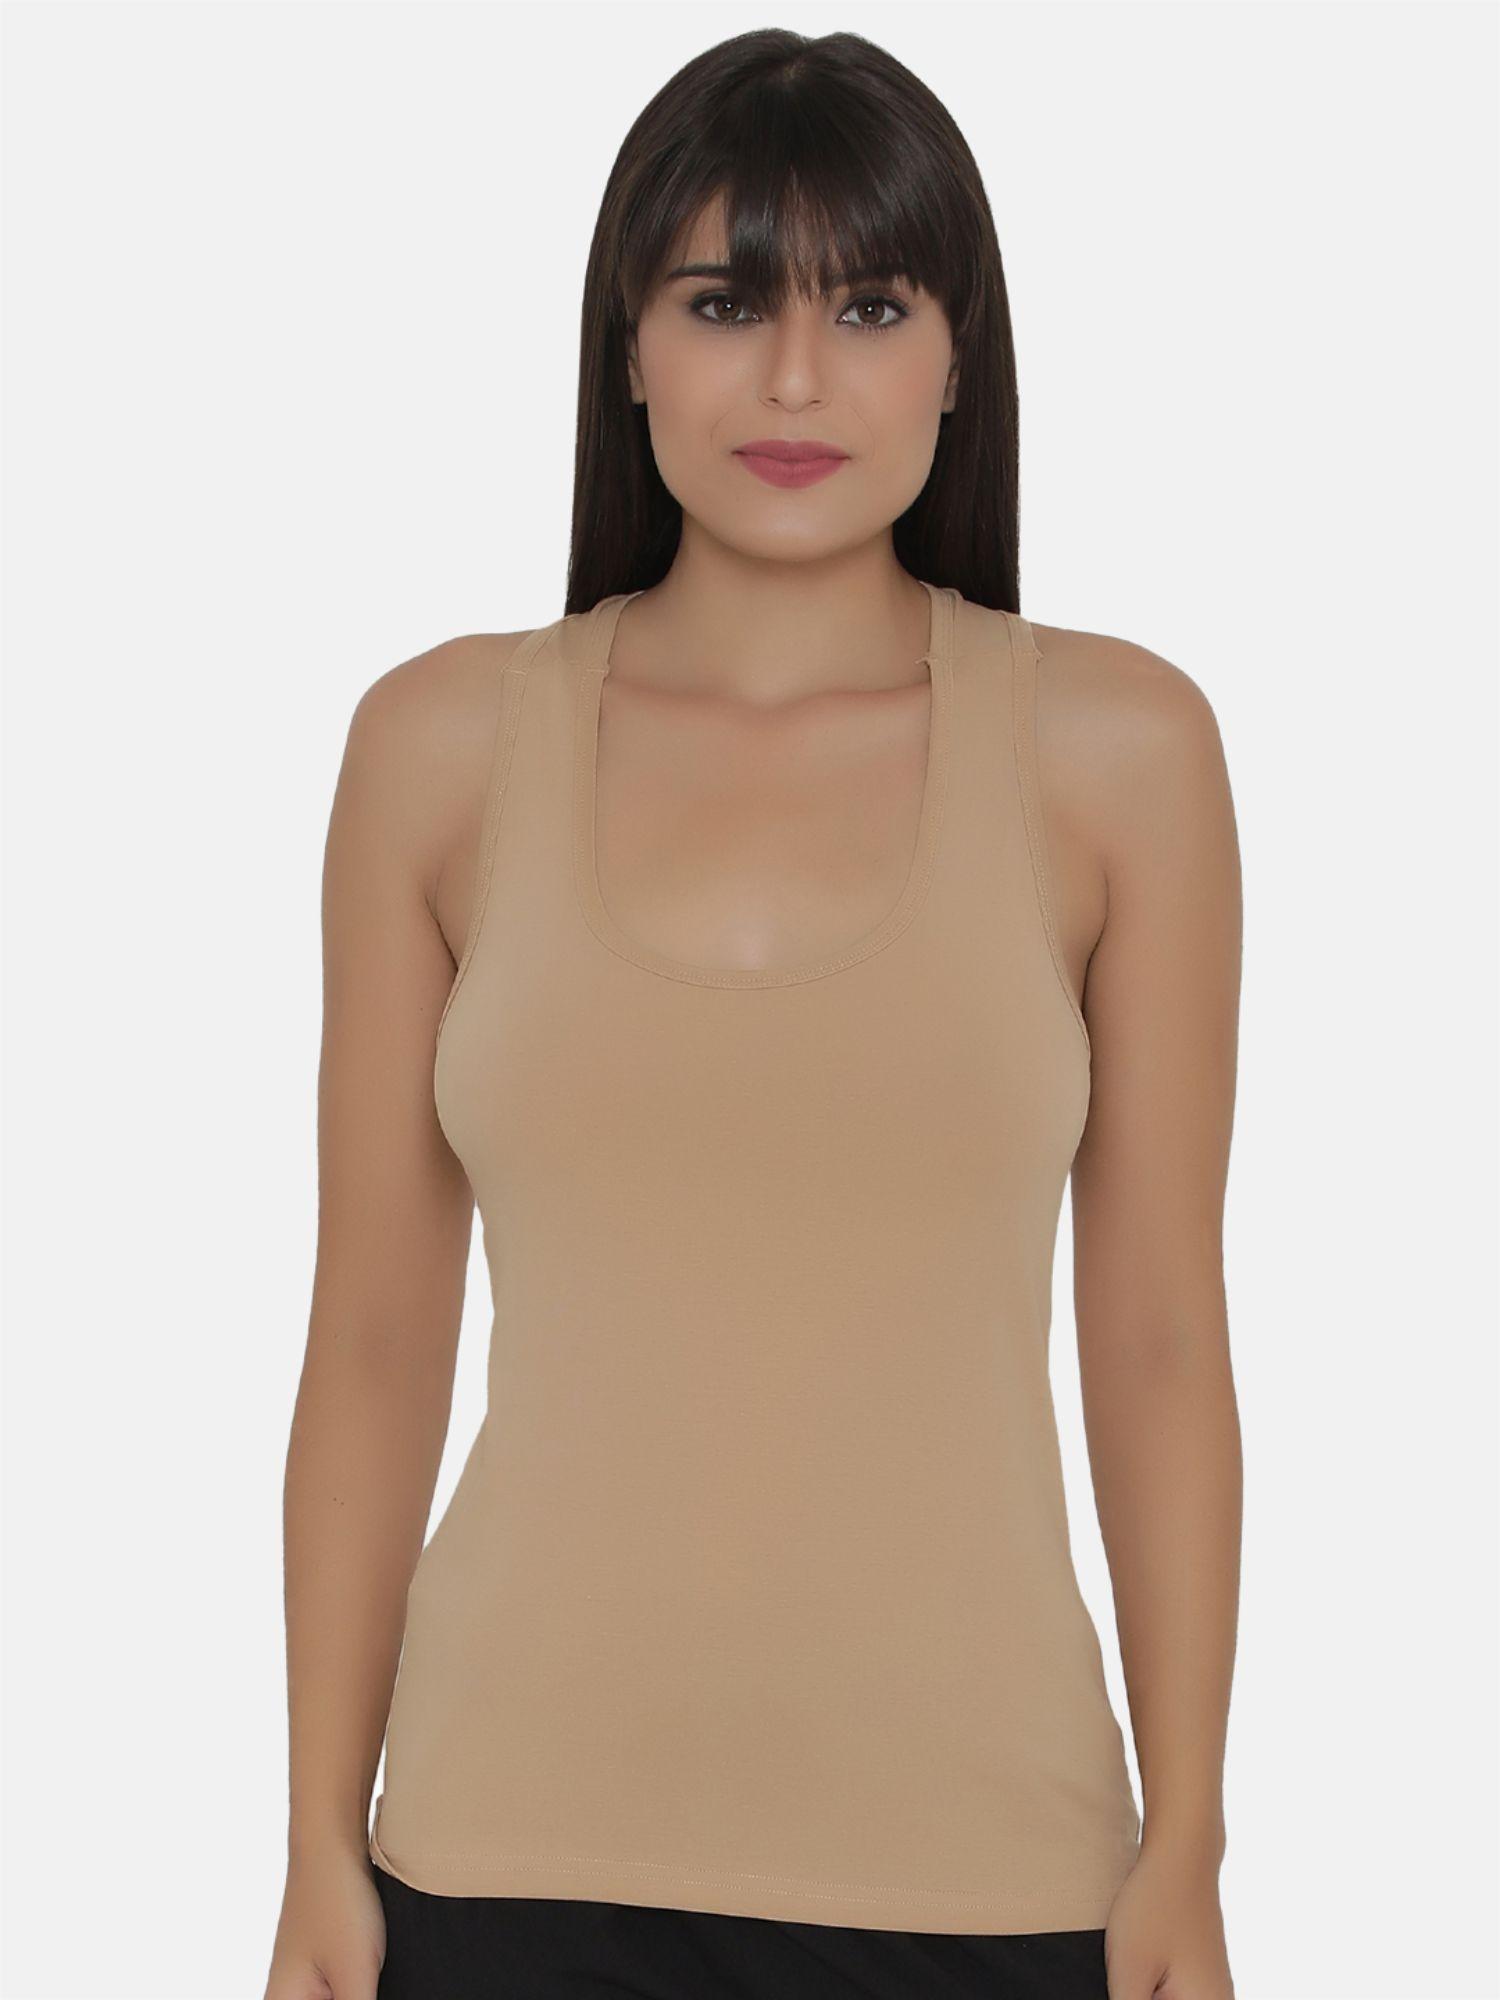 tank top in nude-colour - cotton rich